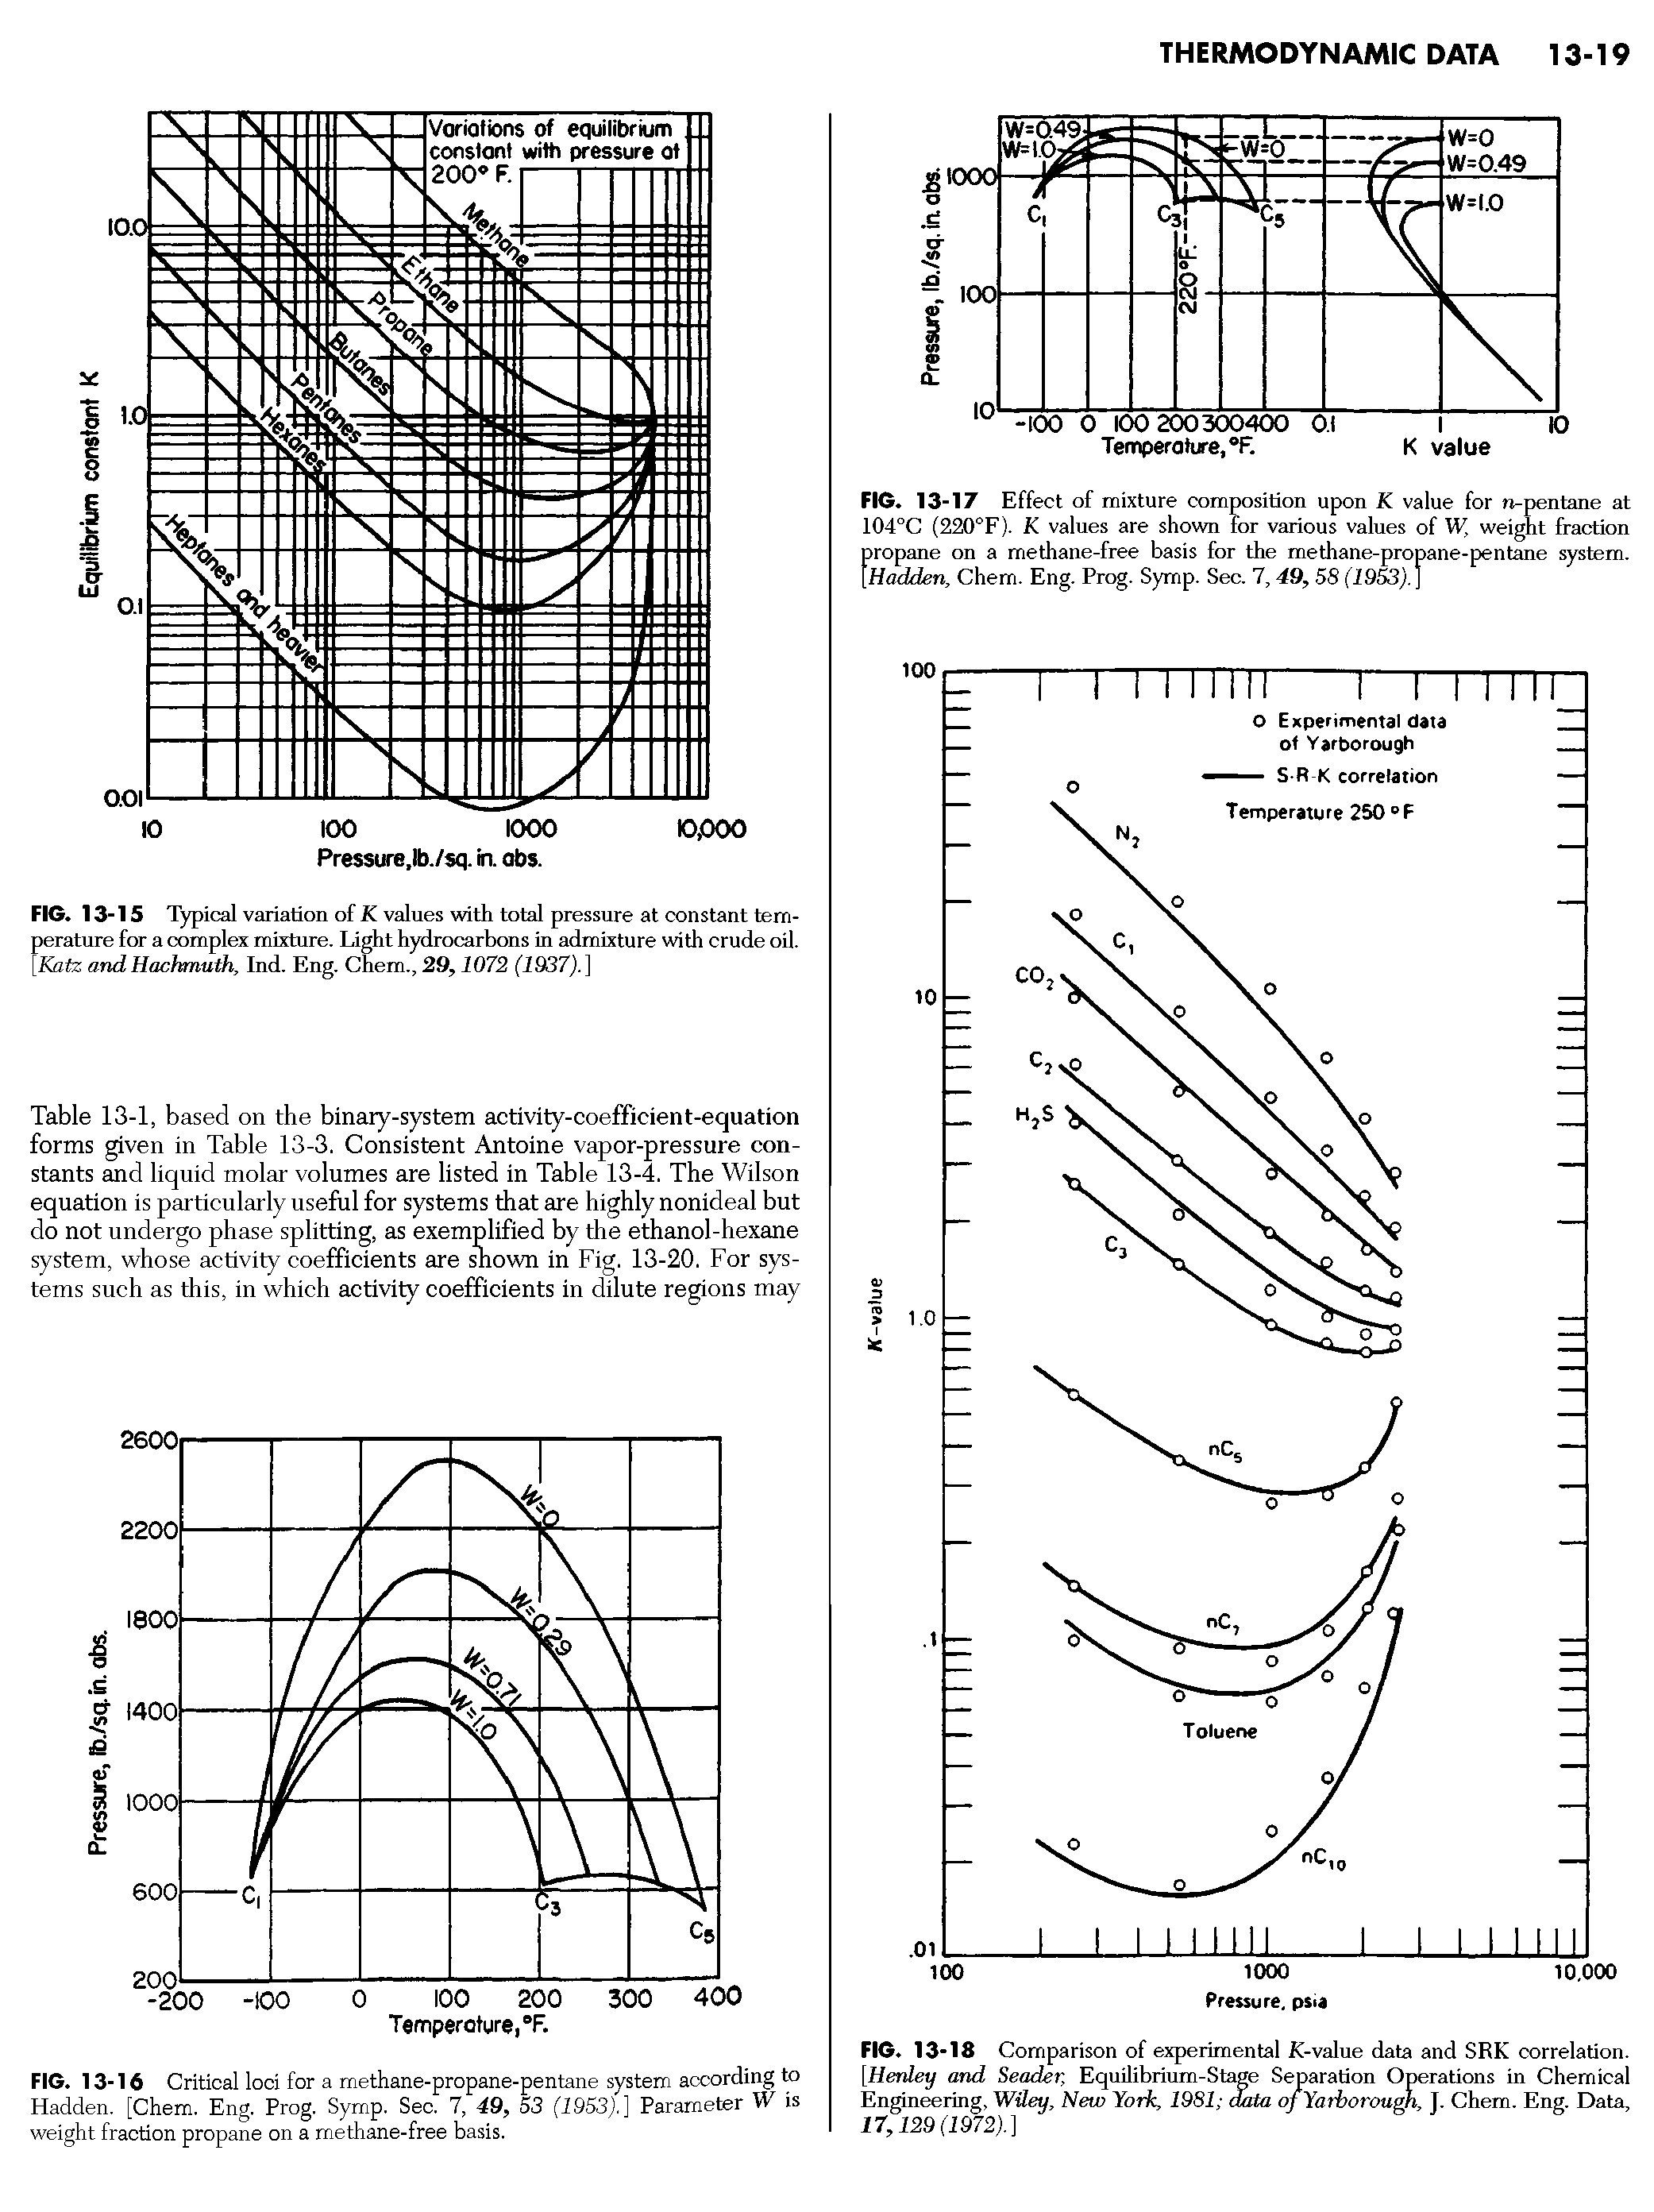 Table 13-1, based on the binary-system activity-coefficient-equation forms given in Table 13-3. Consistent Antoine vapor-pressure constants and liquid molar volumes are listed in Table 13-4. The Wilson equation is particularly useful for systems that are highly nonideal but do not undergo phase splitting, as exemplified by the ethanol-hexane system, whose activity coefficients are shown in Fig. 13-20. For systems such as this, in which activity coefficients in dilute regions may...